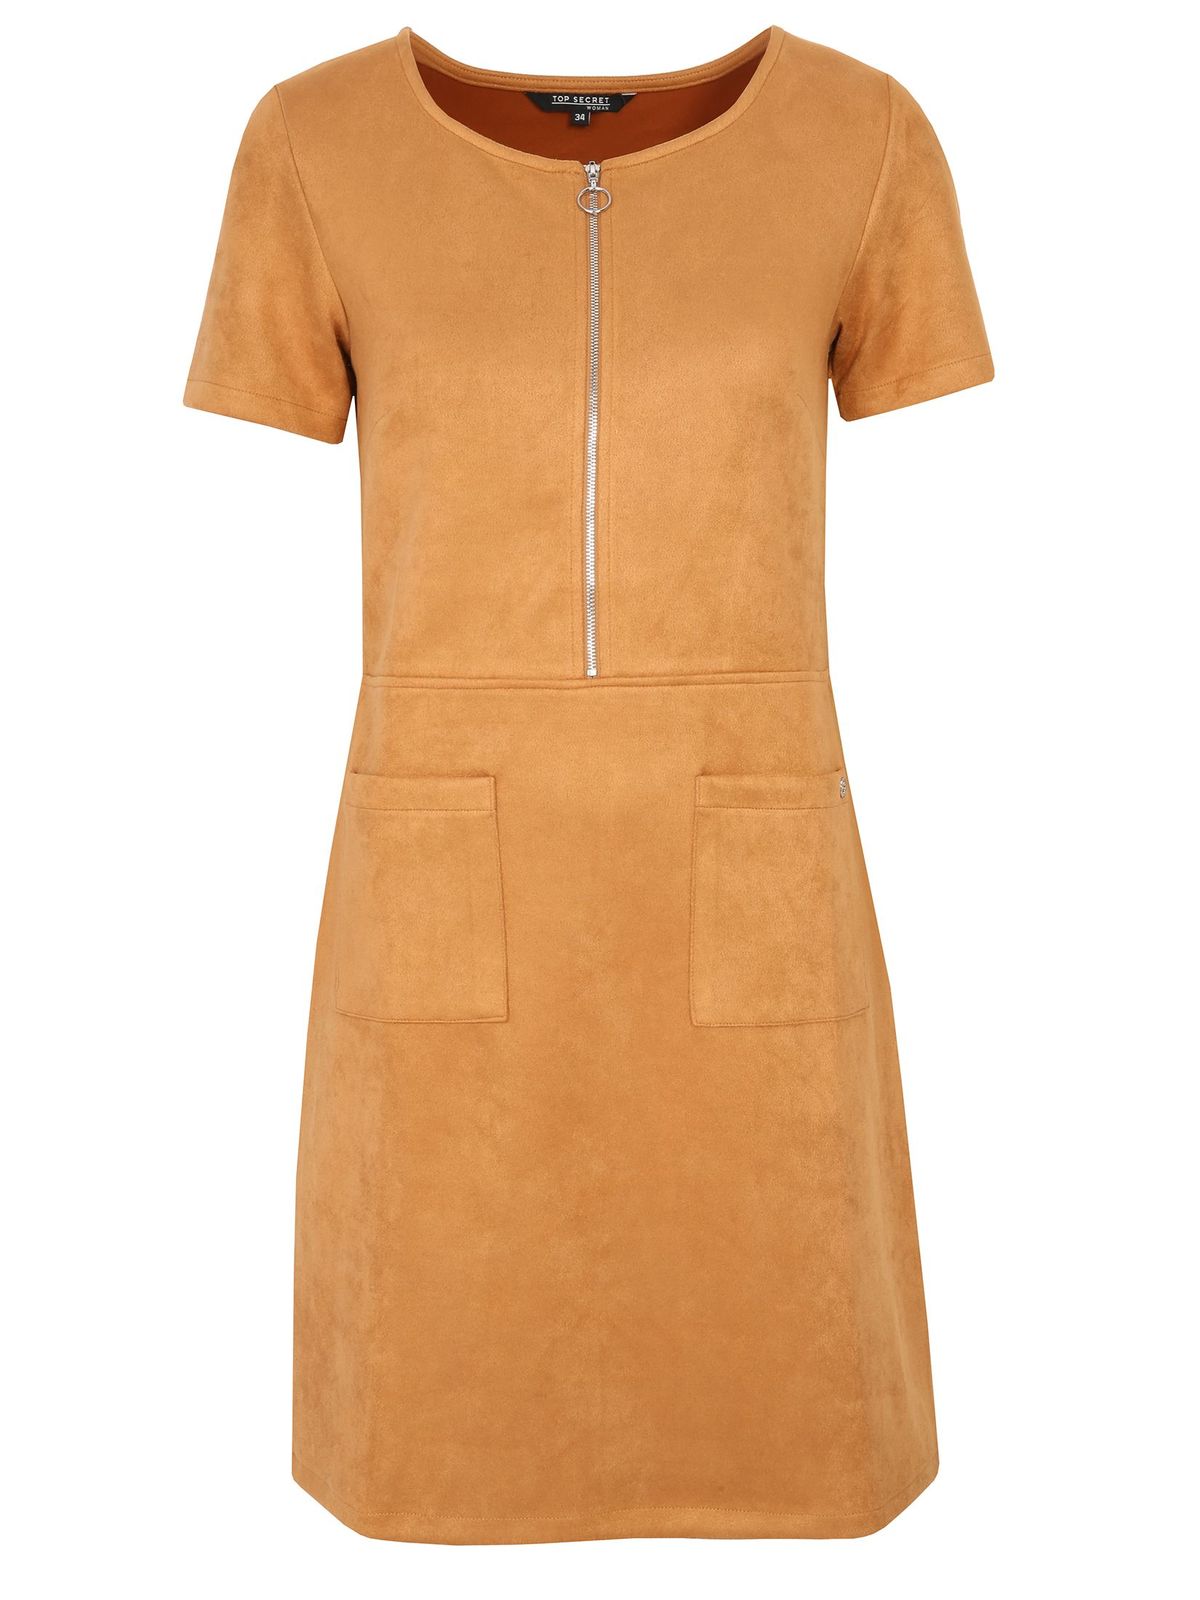 Lightbrown dress from suede pencil short cut with front pockets 6 - StarShinerS.com